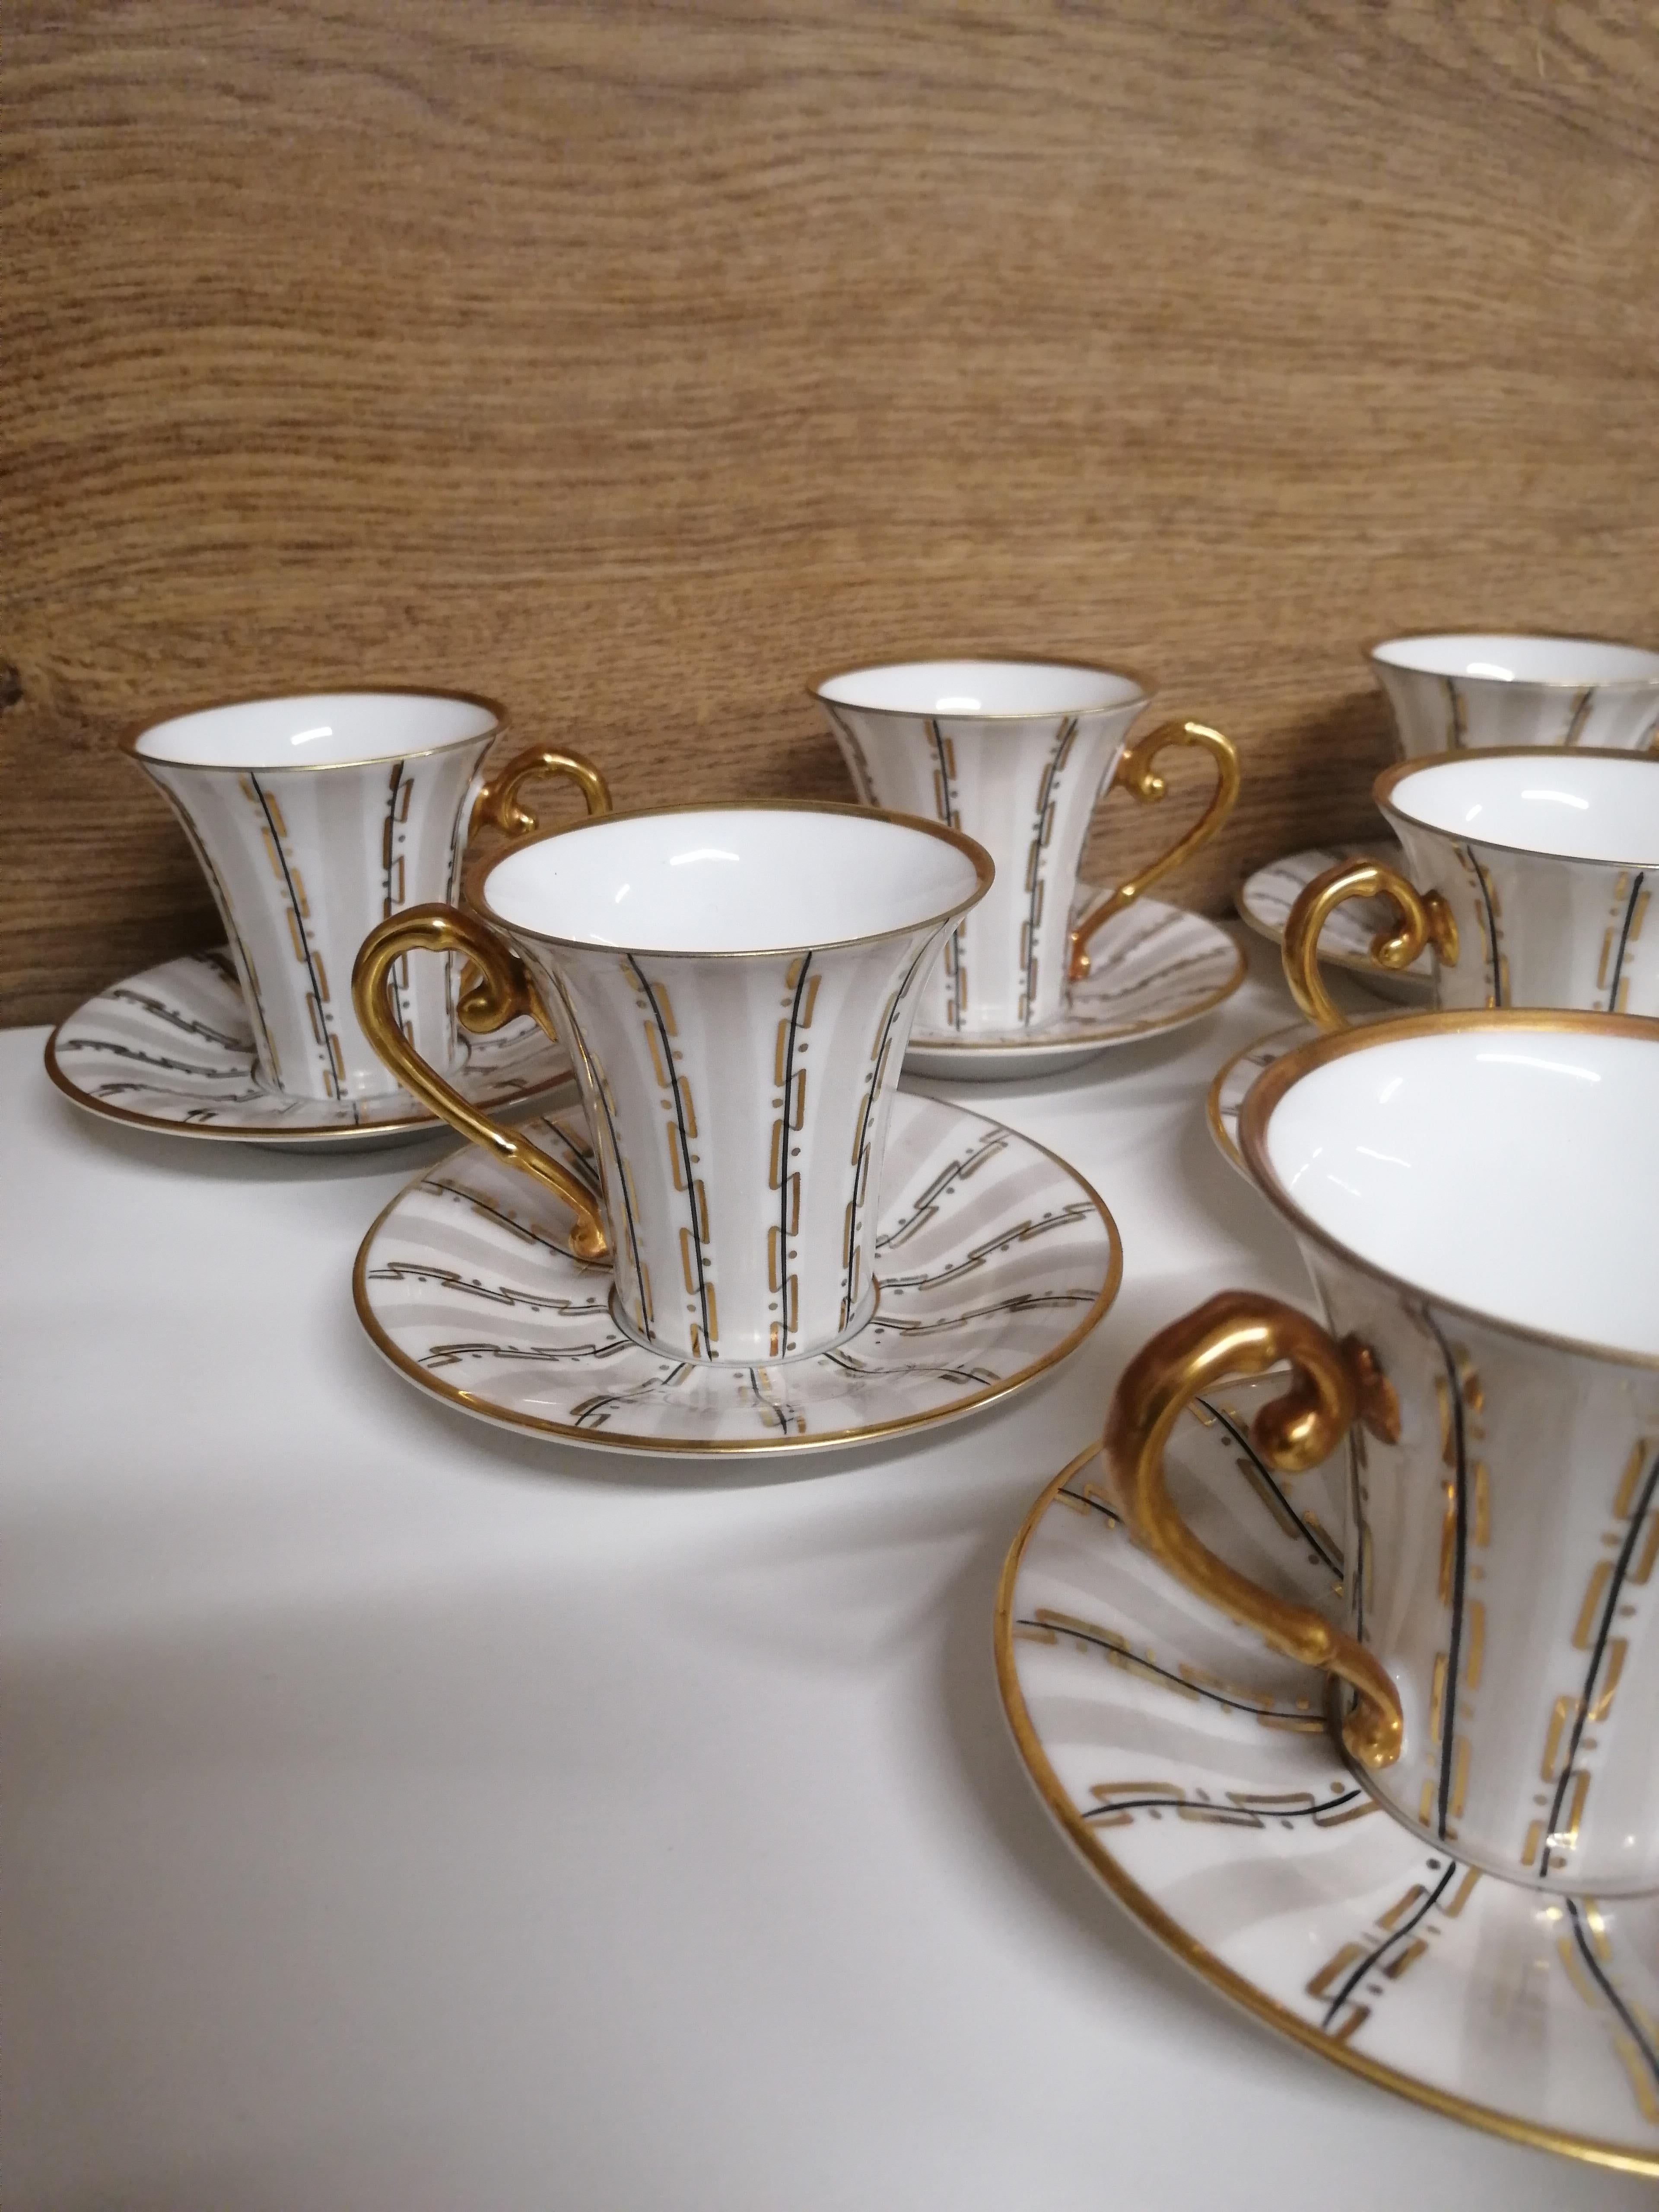 11 Art Deco Hutschenreuther cups.

Measures: A cup with a diameter of 6.3 cm
Height: 6 cm

Saucer
Diameter 10 cm.







